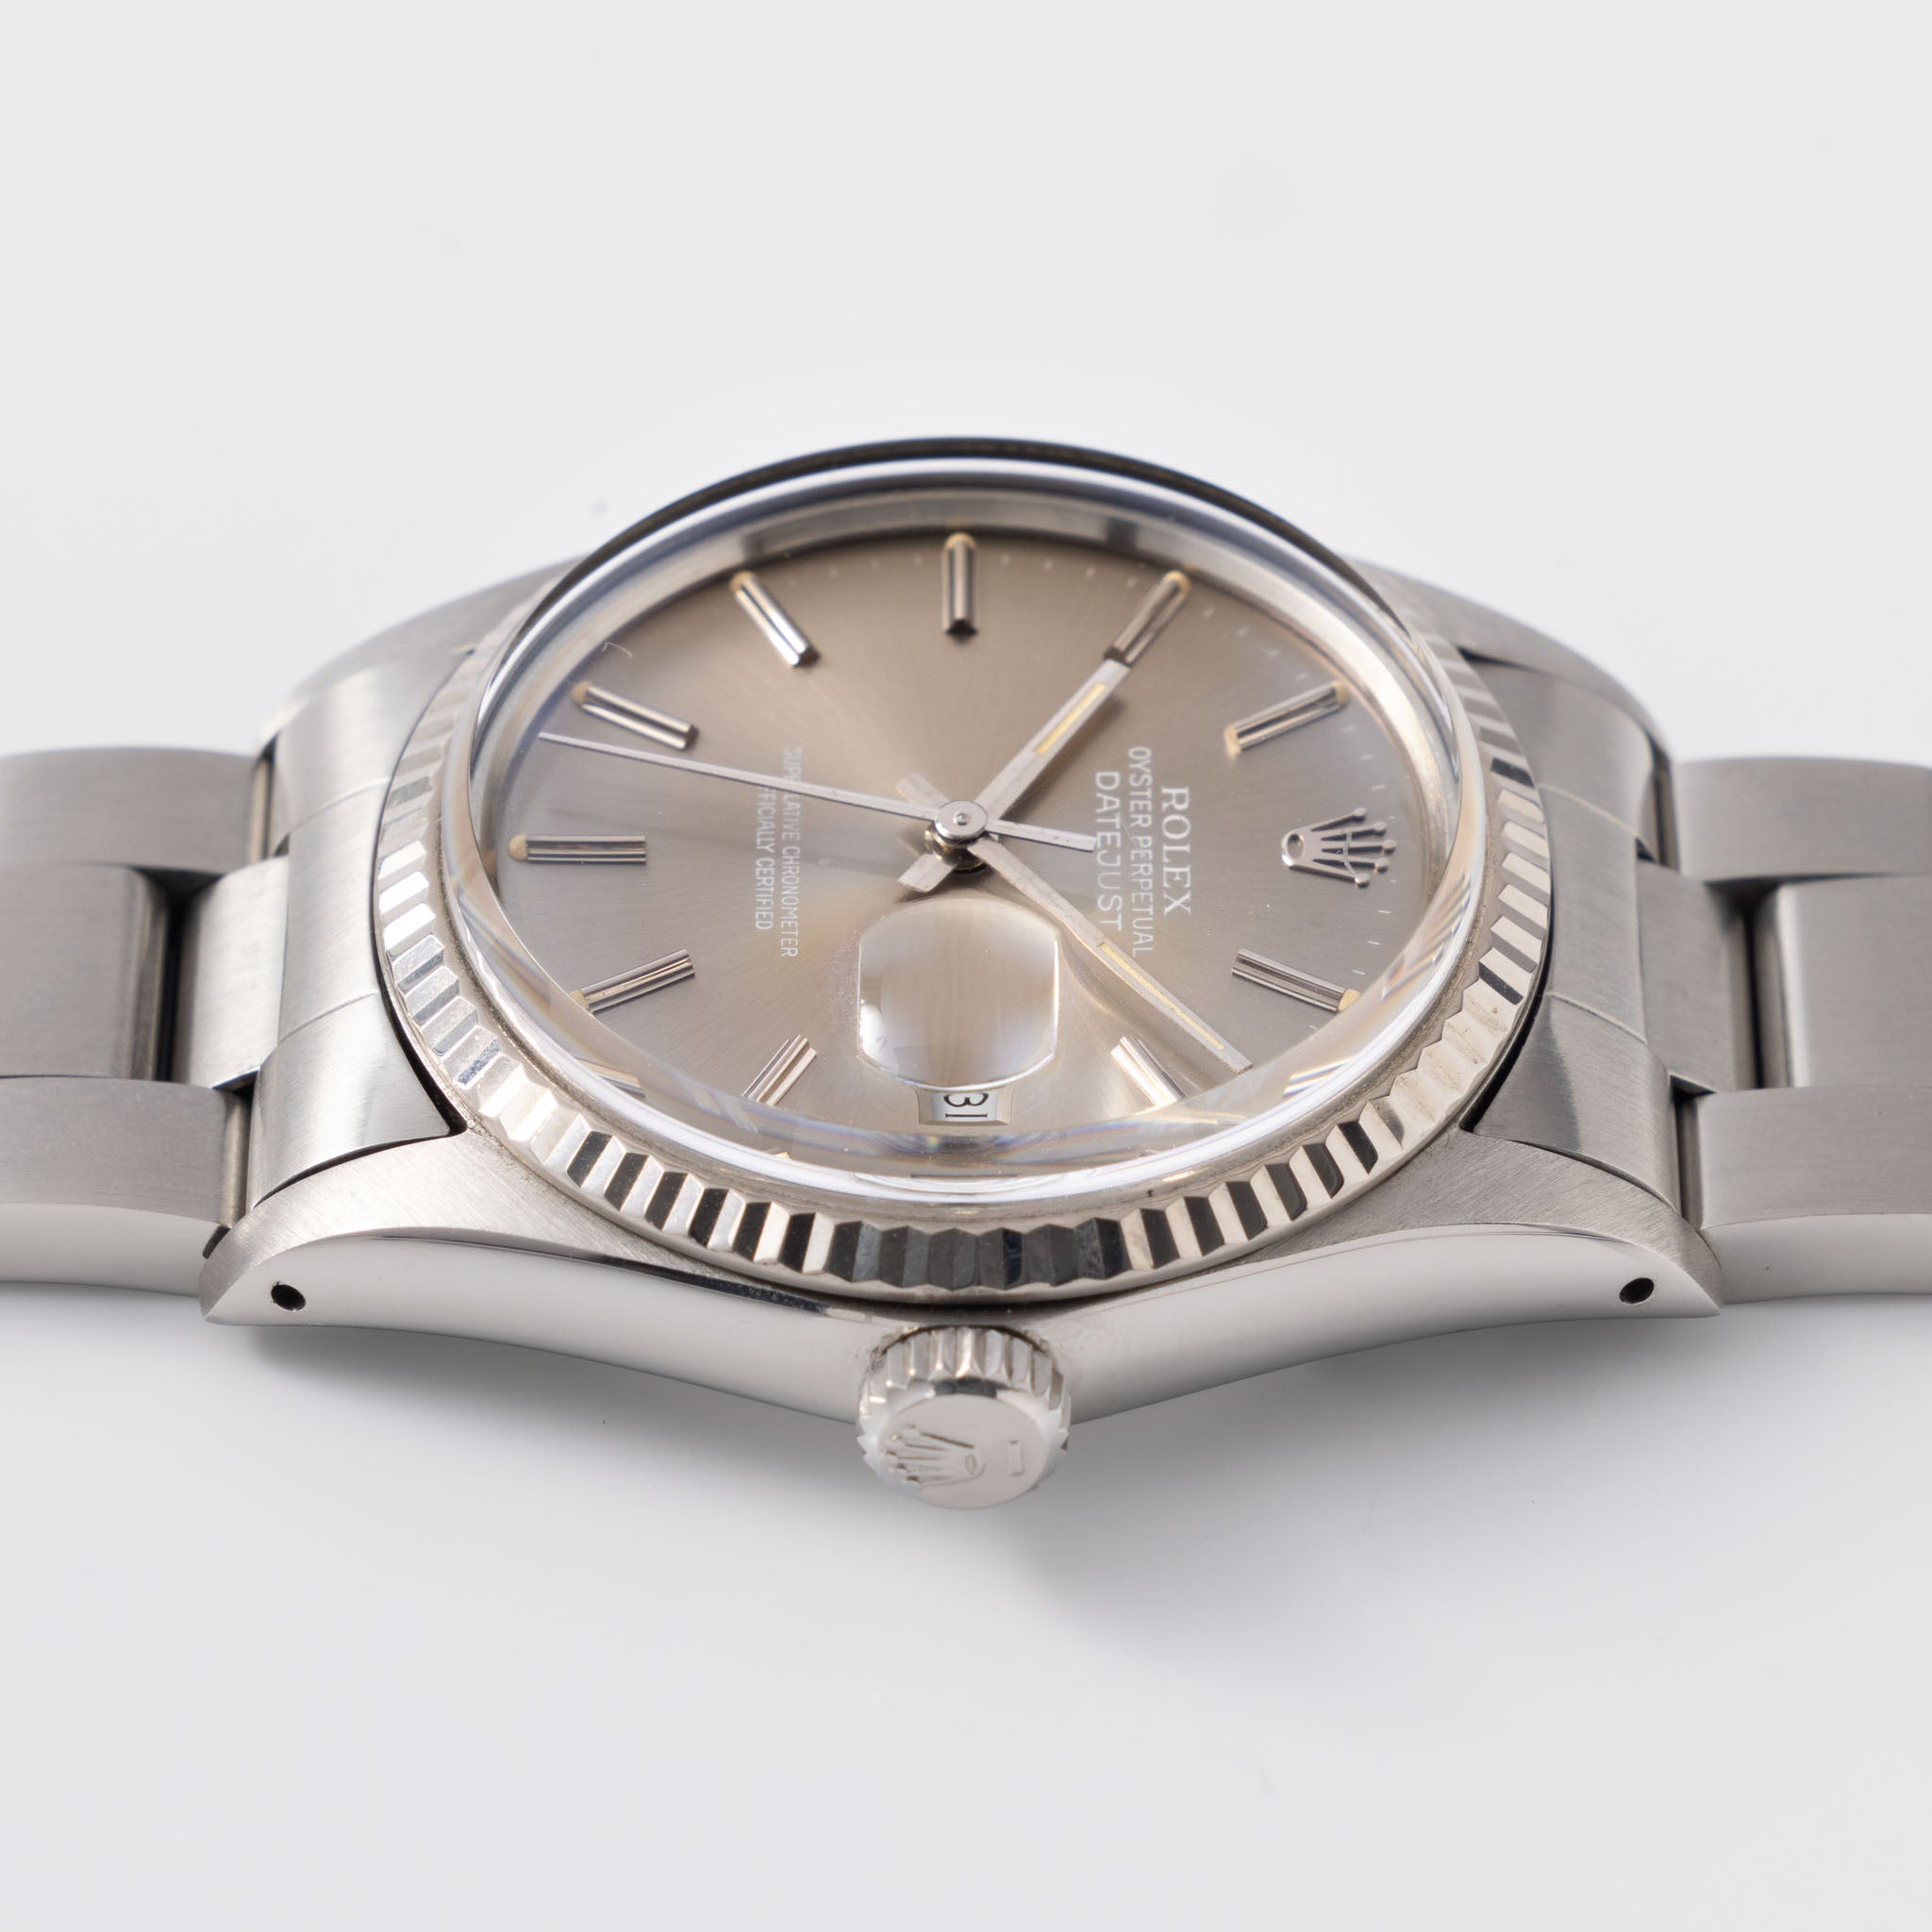 Rolex Datejust Taupe dial ref 16014